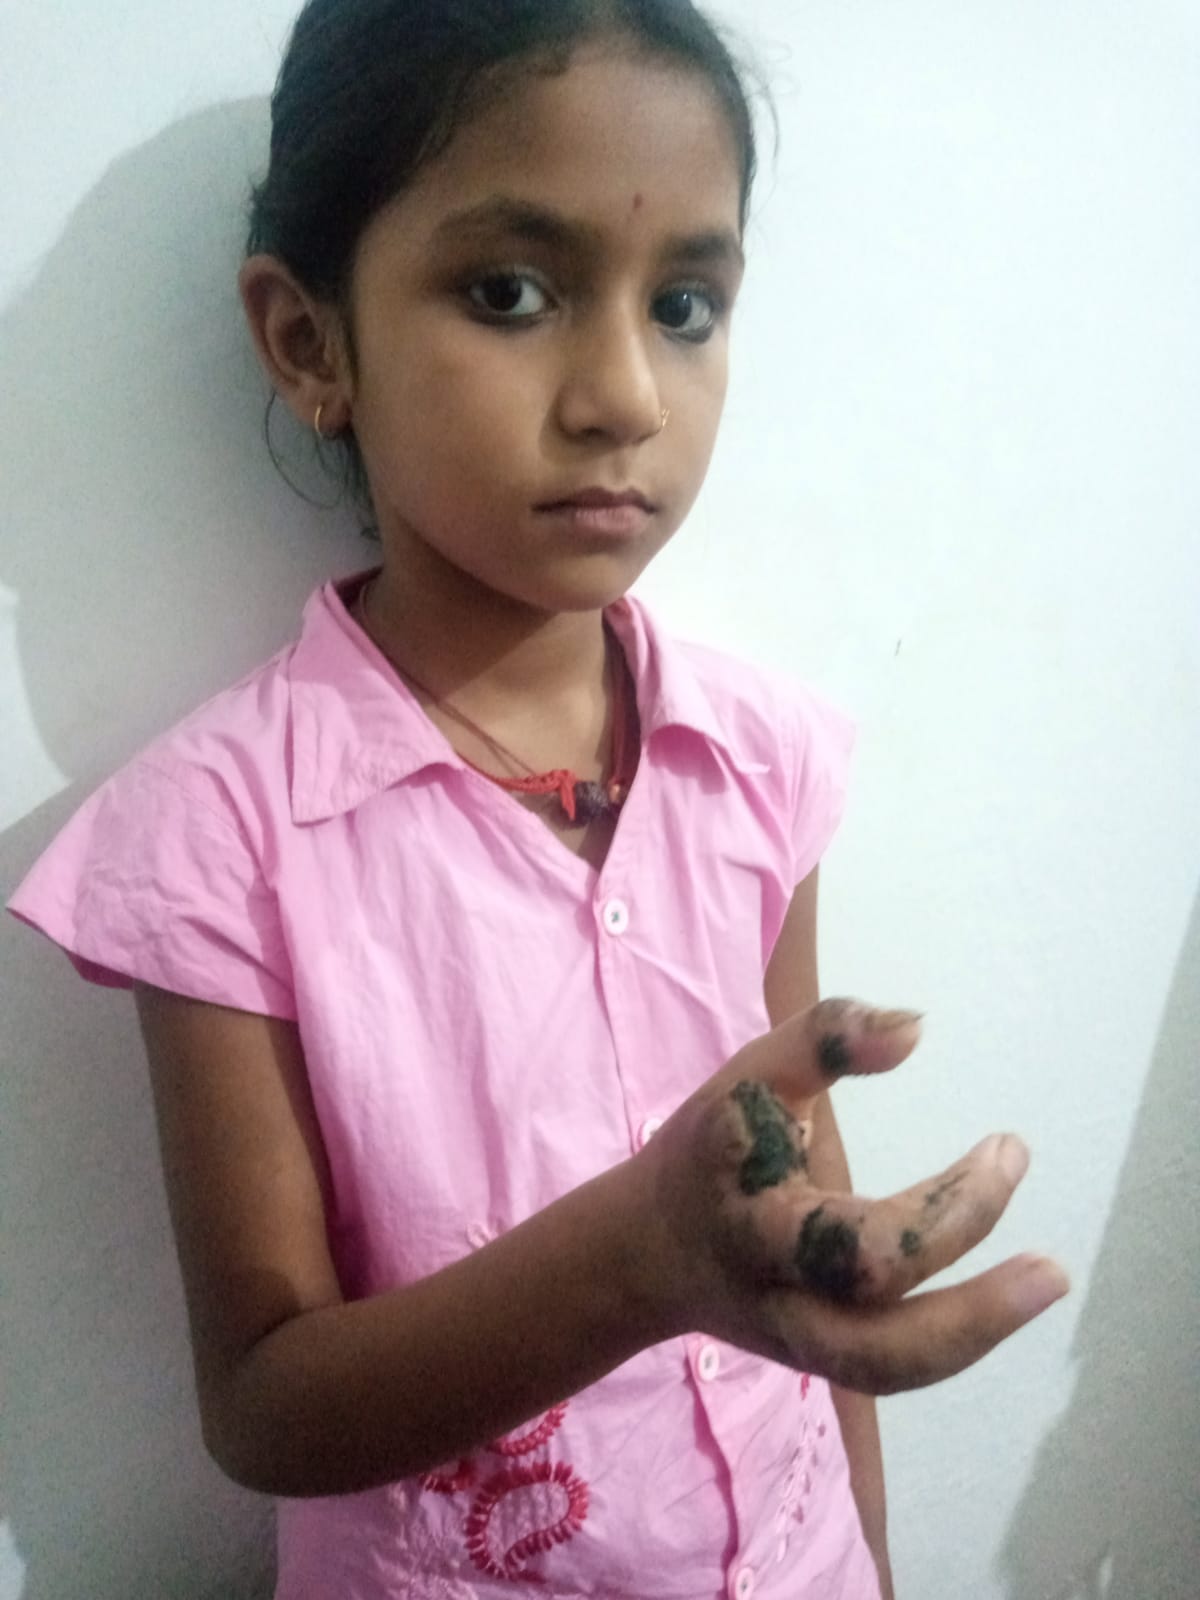 10 Year Old Girls Finger Had To Be Amputated Due To Wrong Treatment